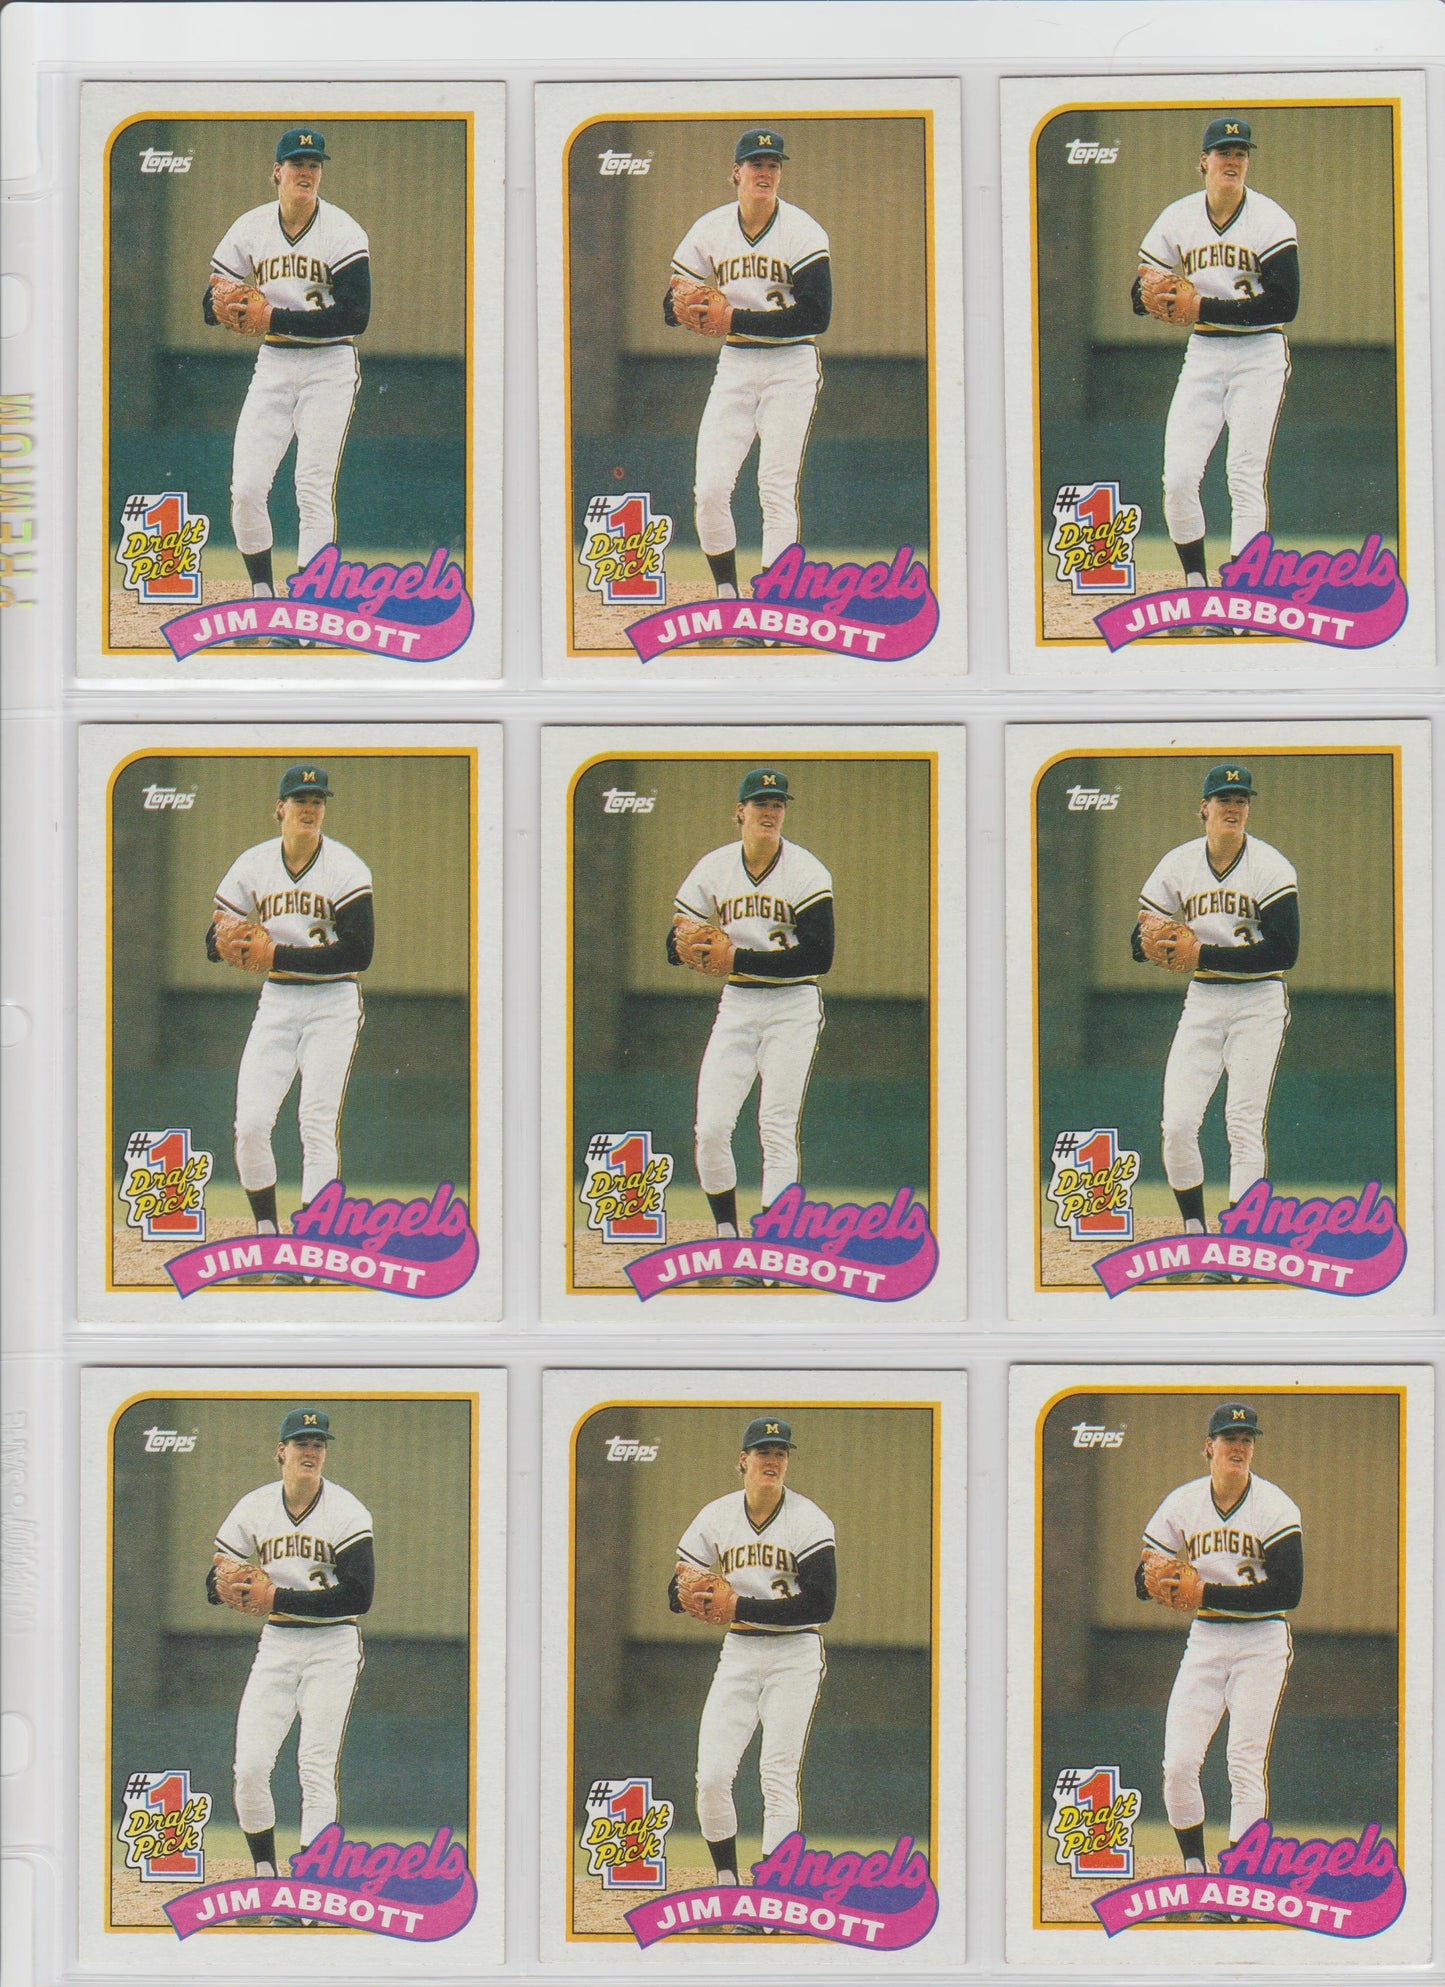 Dealers Lot 0f 10 CARDS - 1989 TOPPS #573 JIM ABBOTT Rookie Cards $2.50 !